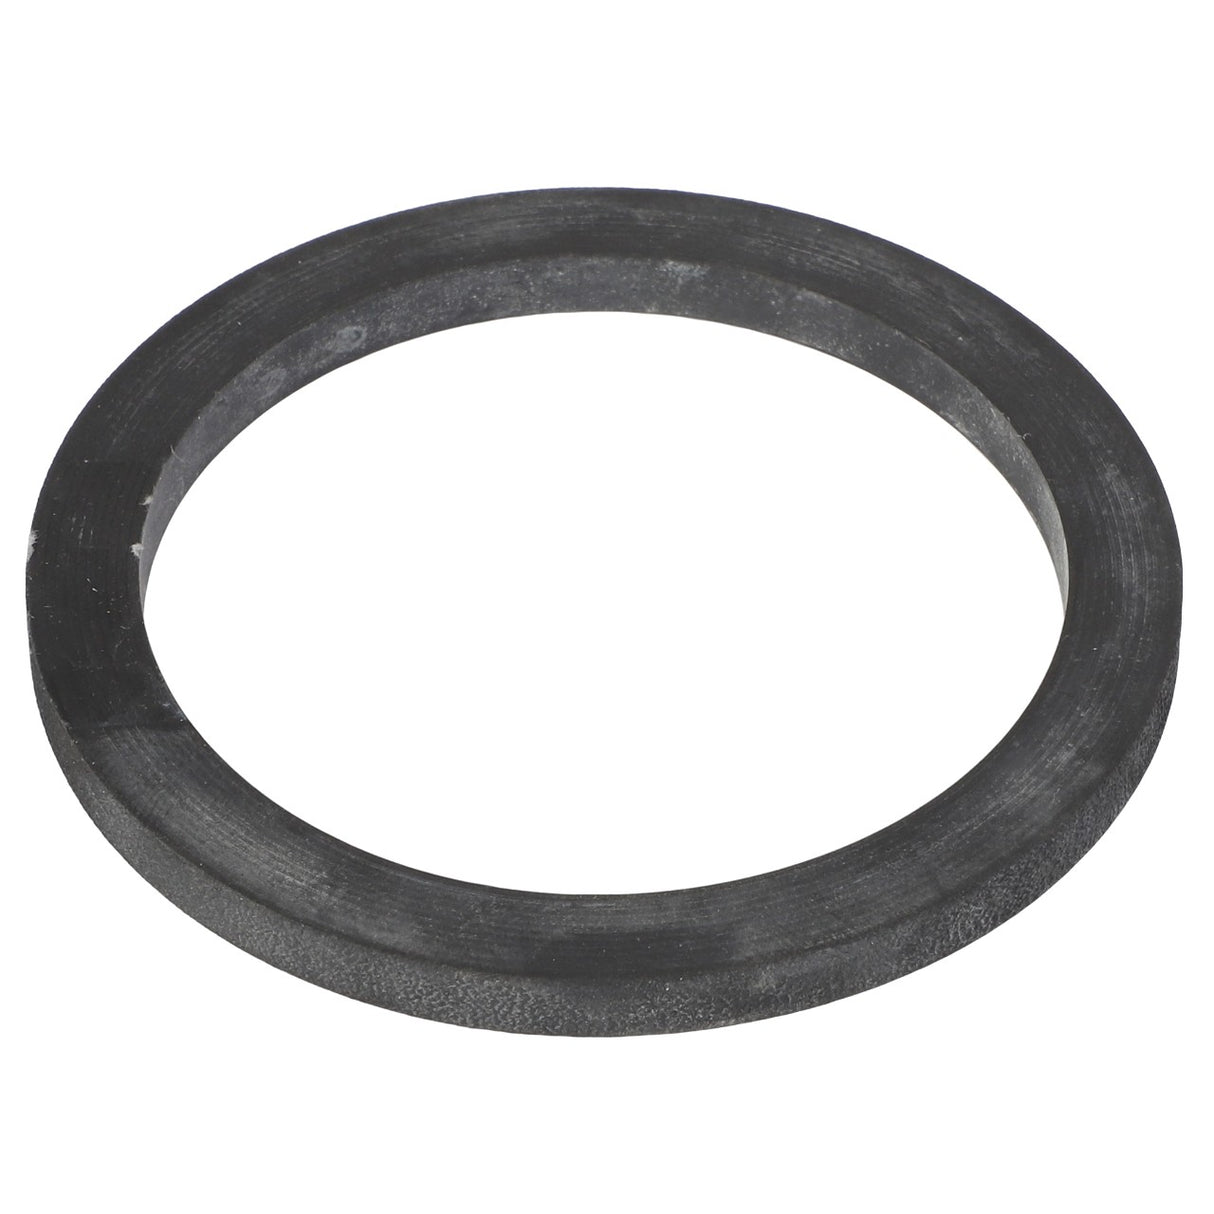 AGCO | Rubber Washer - Ag002072 - Farming Parts